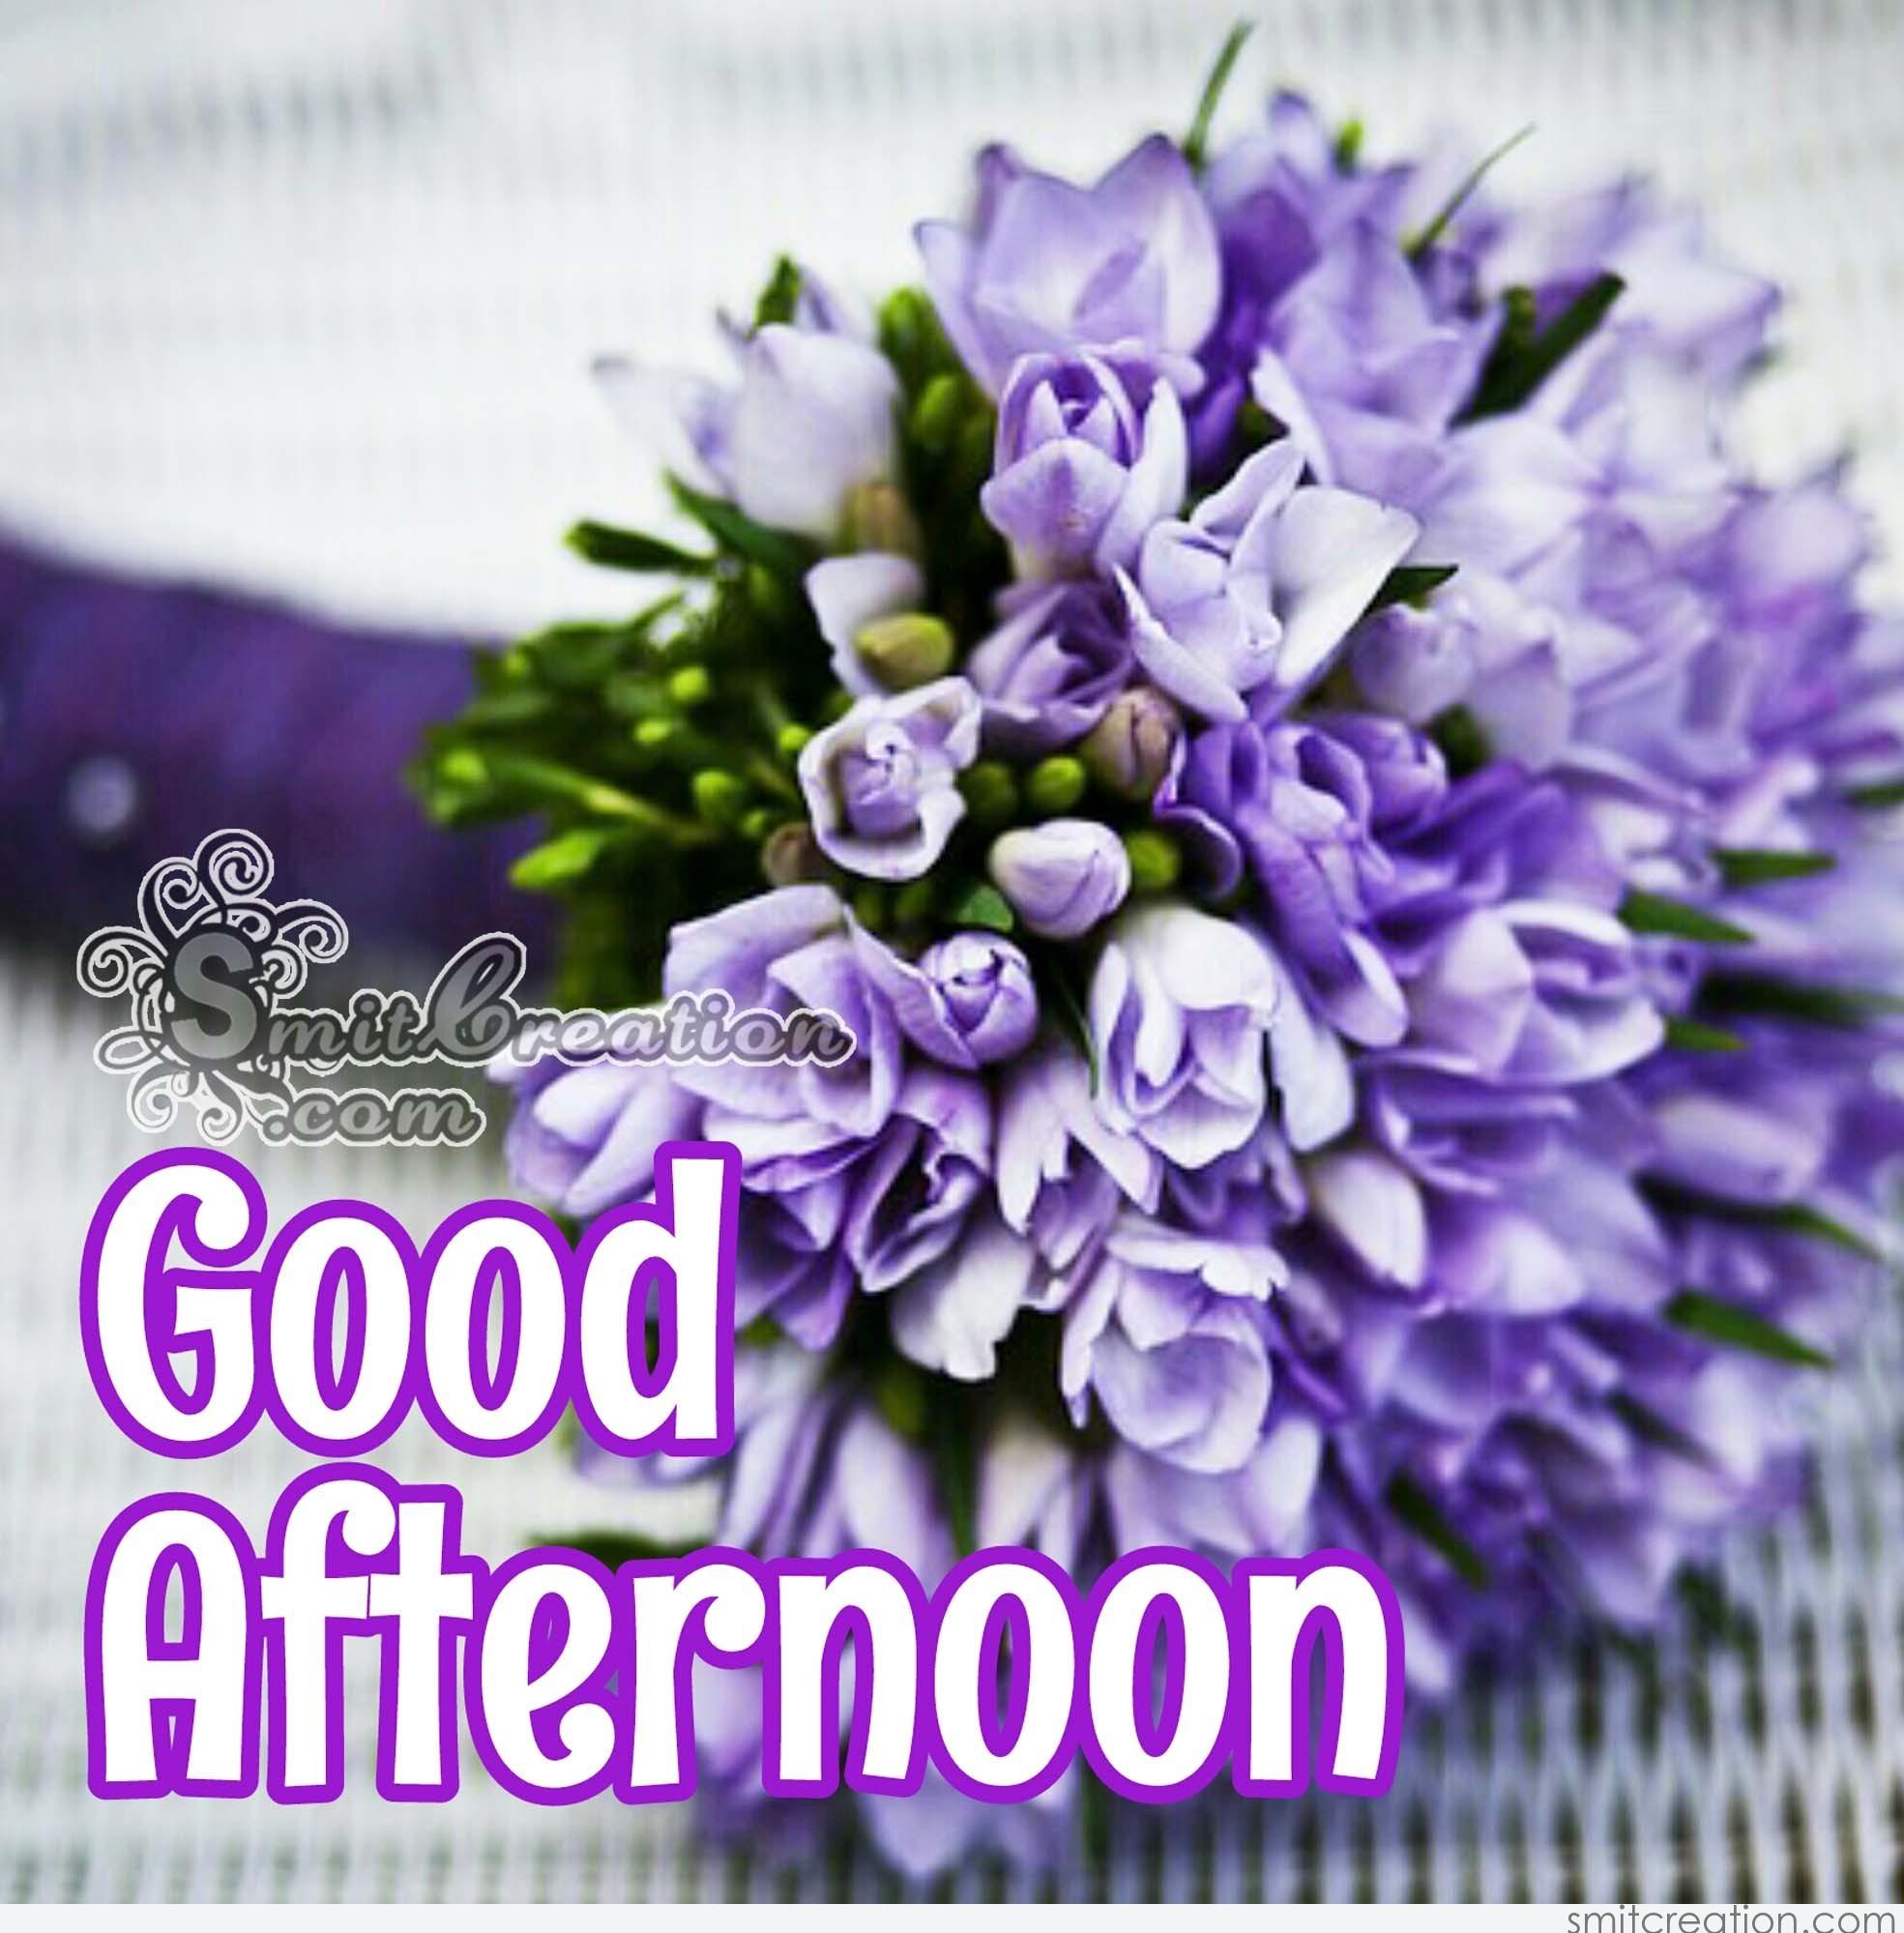 Good Afternoon Flower Pictures and Graphics - SmitCreation.com